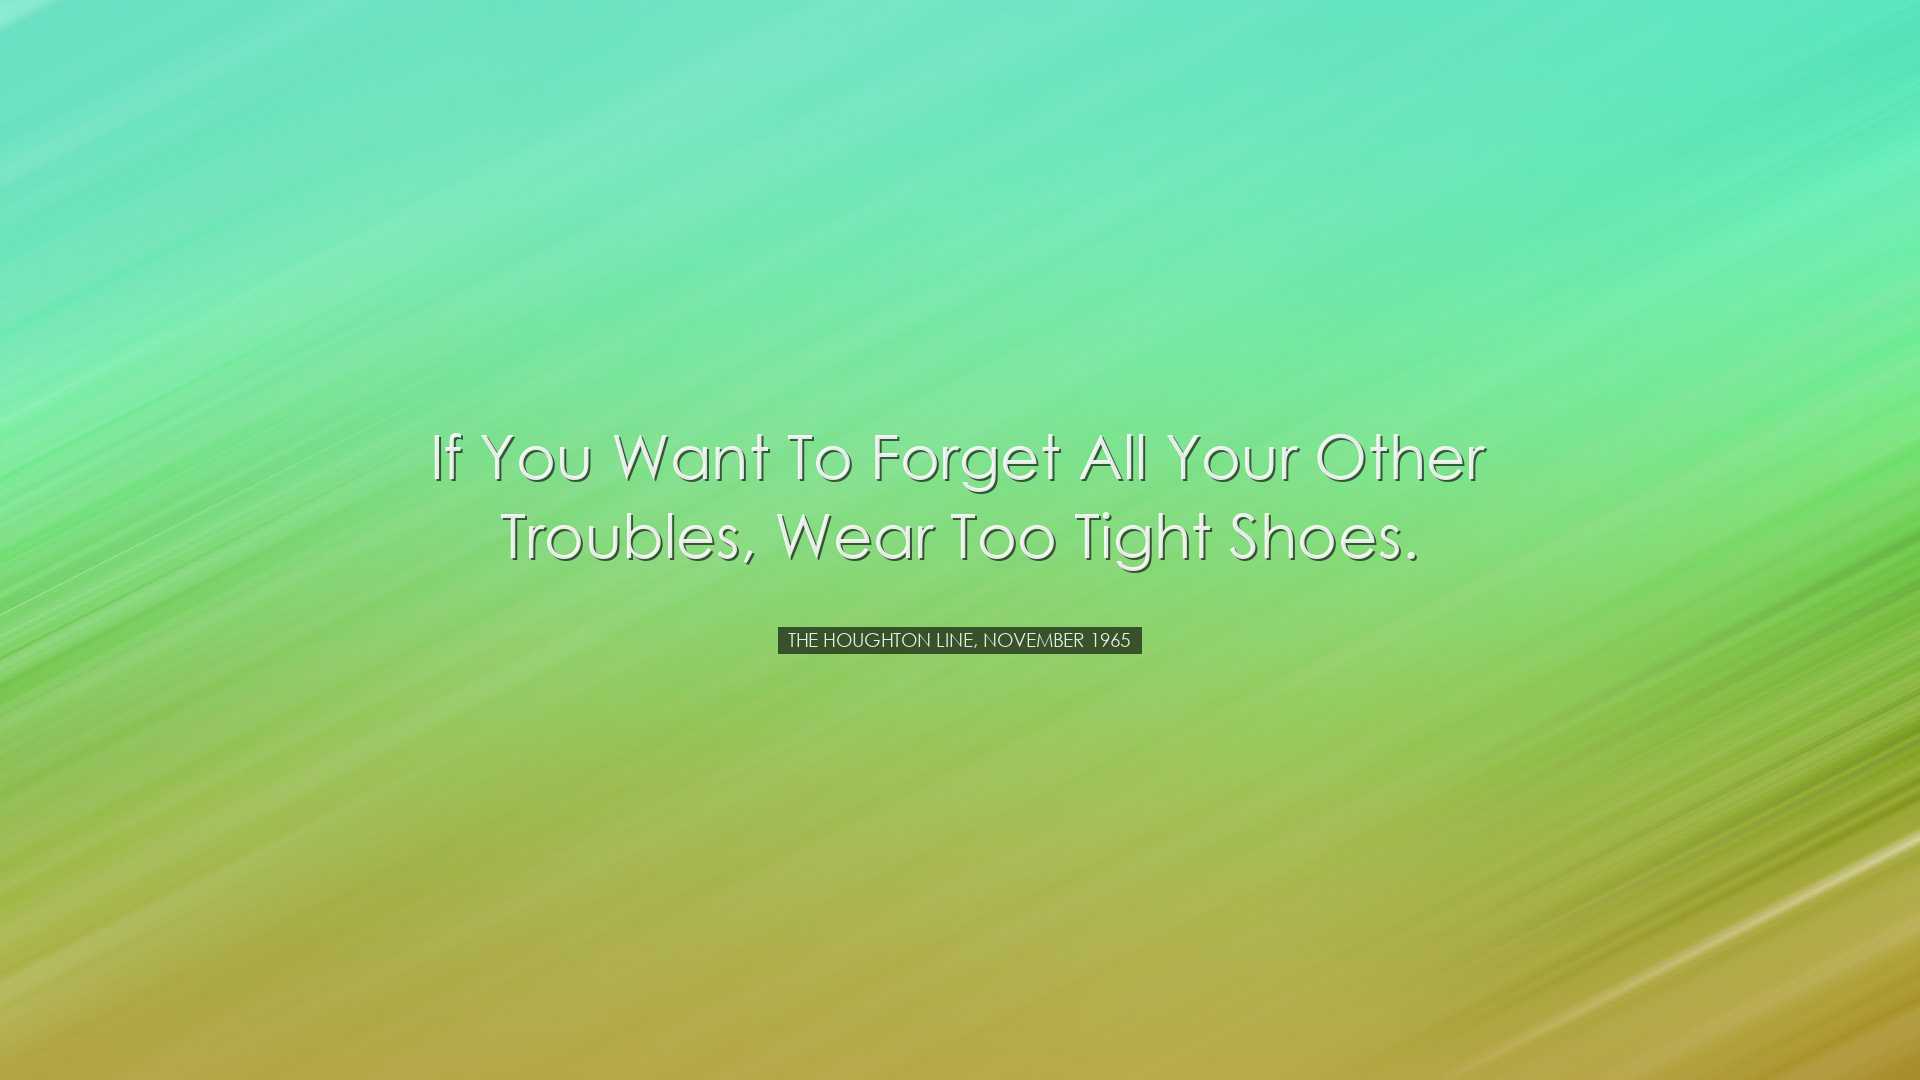 If you want to forget all your other troubles, wear too tight shoe